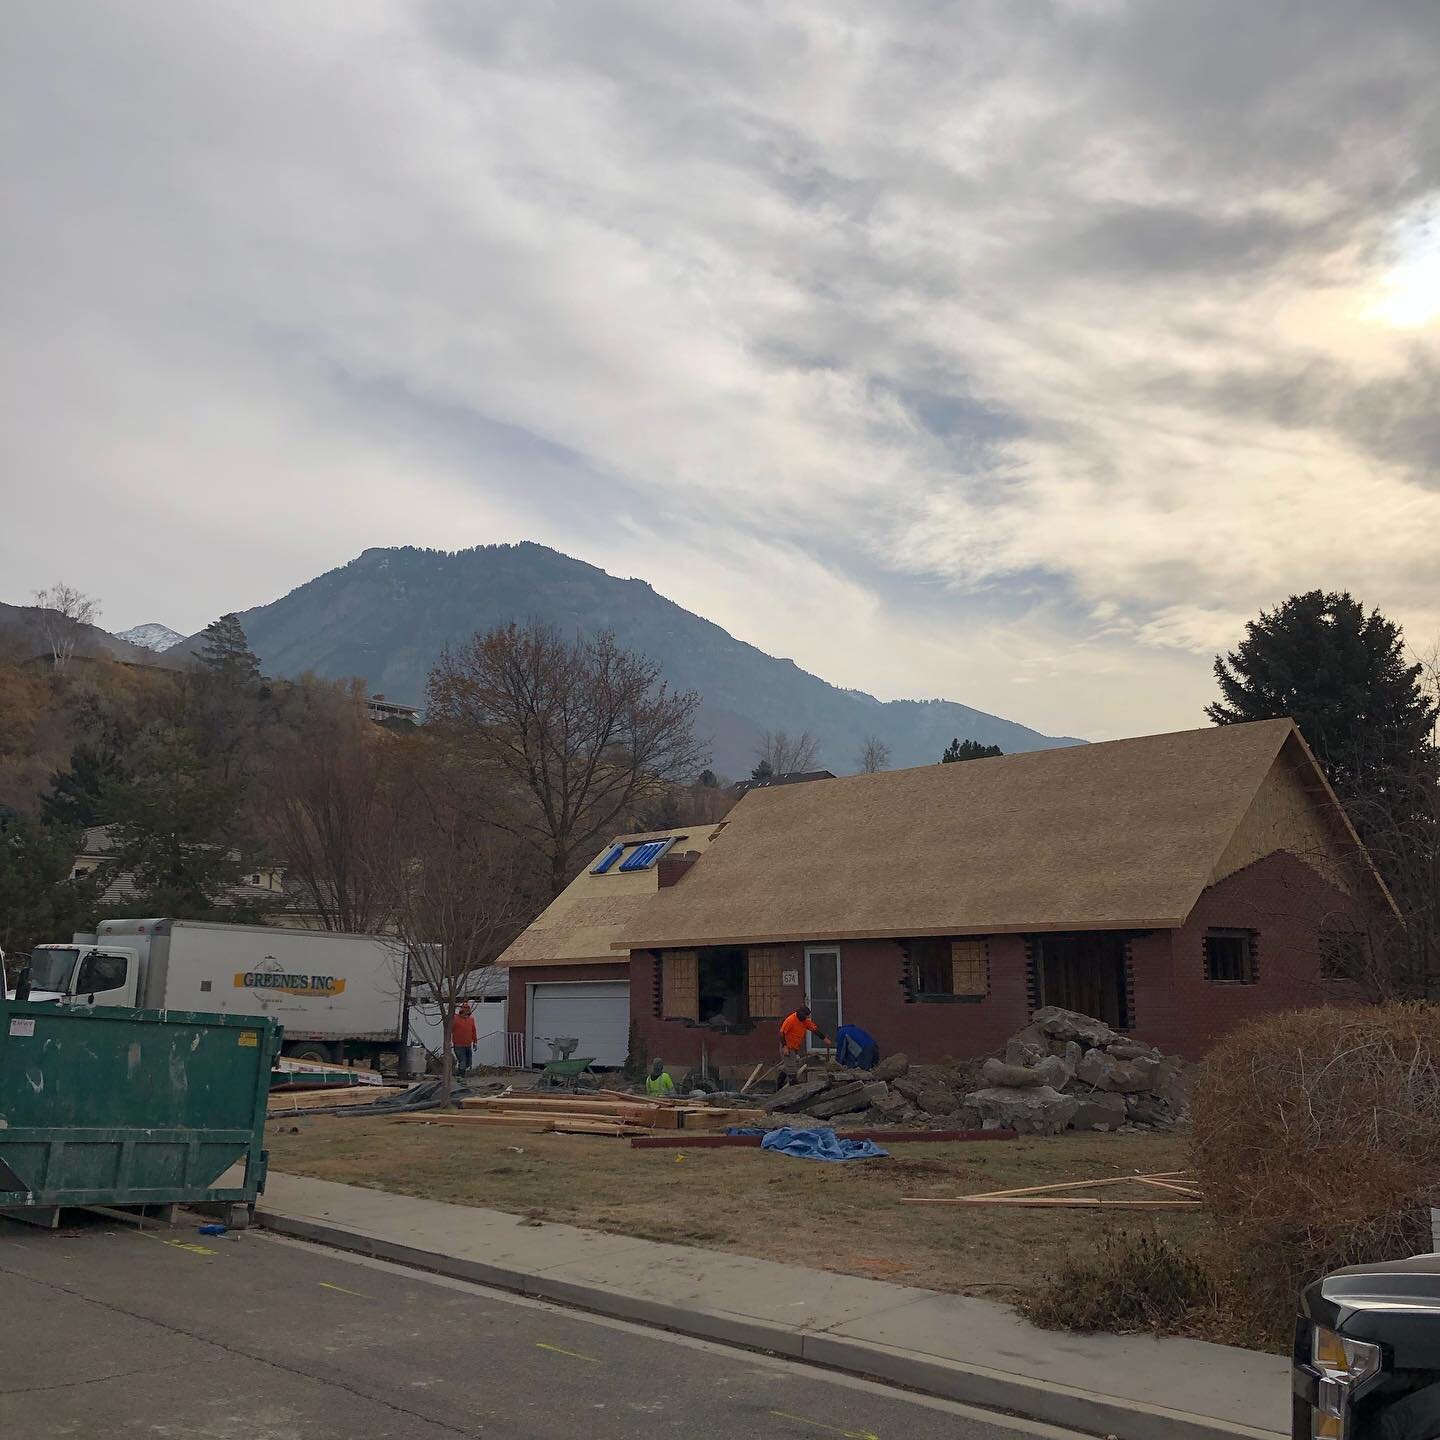 The past few weeks have been about building a little up and tearing a little down on our Provo project! Redoing the roof, tearing out the basement floor to rearrange the plumbing, re-sizing windows, pulling out old, drafty fireplaces, cutting in new 